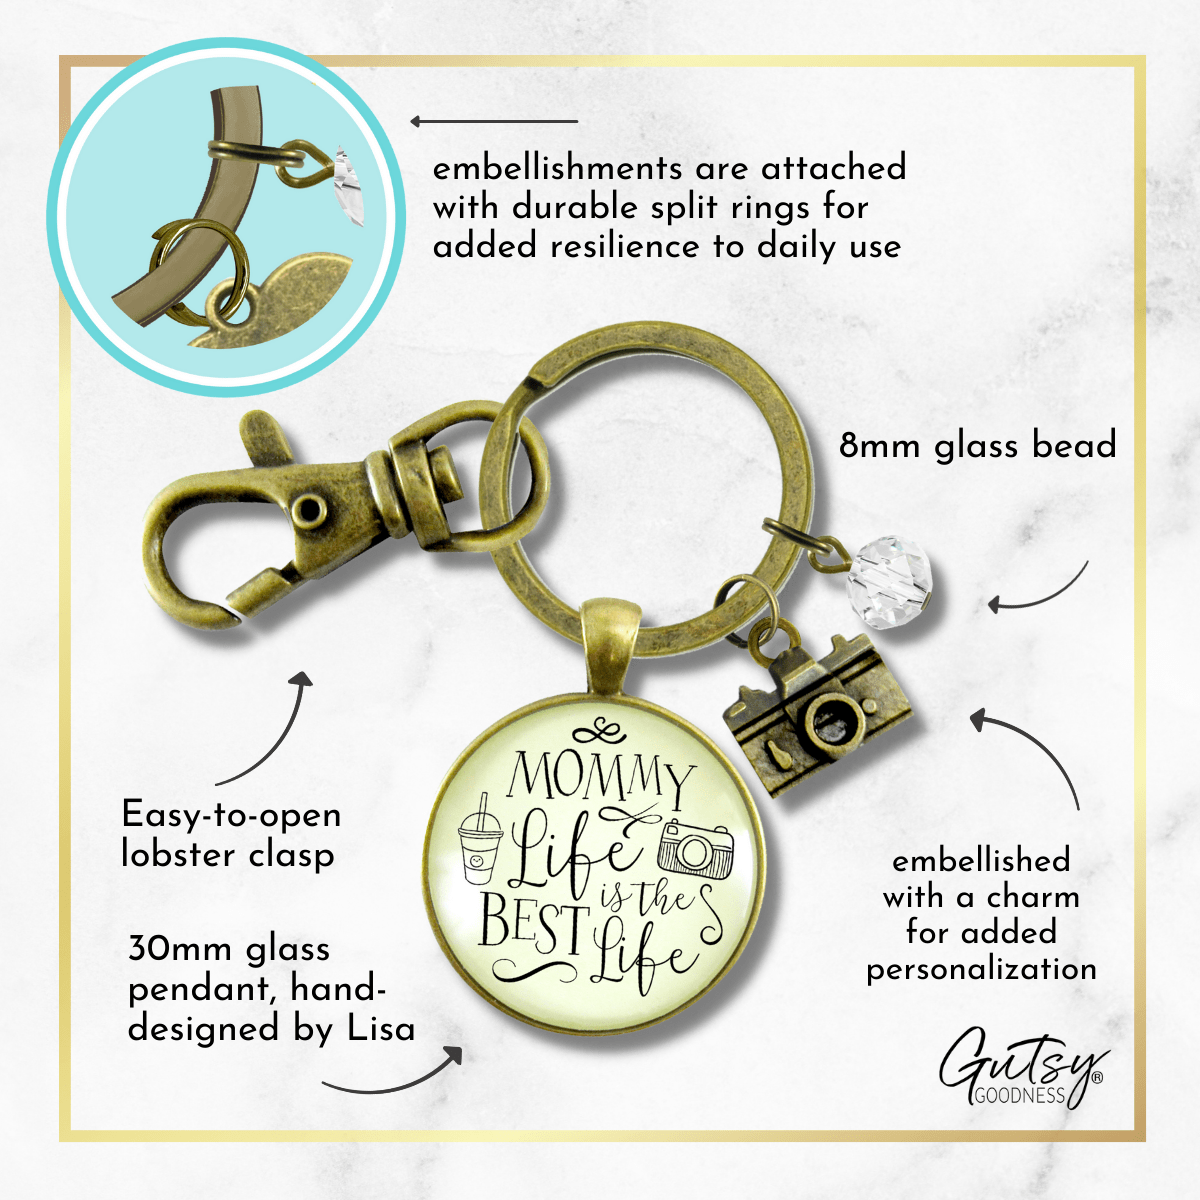 Mom Jewelry Mommy Life Is The Best Life Keychain Rustic Meaningful Camera Charm - Gutsy Goodness Handmade Jewelry;Mom Jewelry Mommy Life Is The Best Life Keychain Rustic Meaningful Camera Charm - Gutsy Goodness Handmade Jewelry Gifts